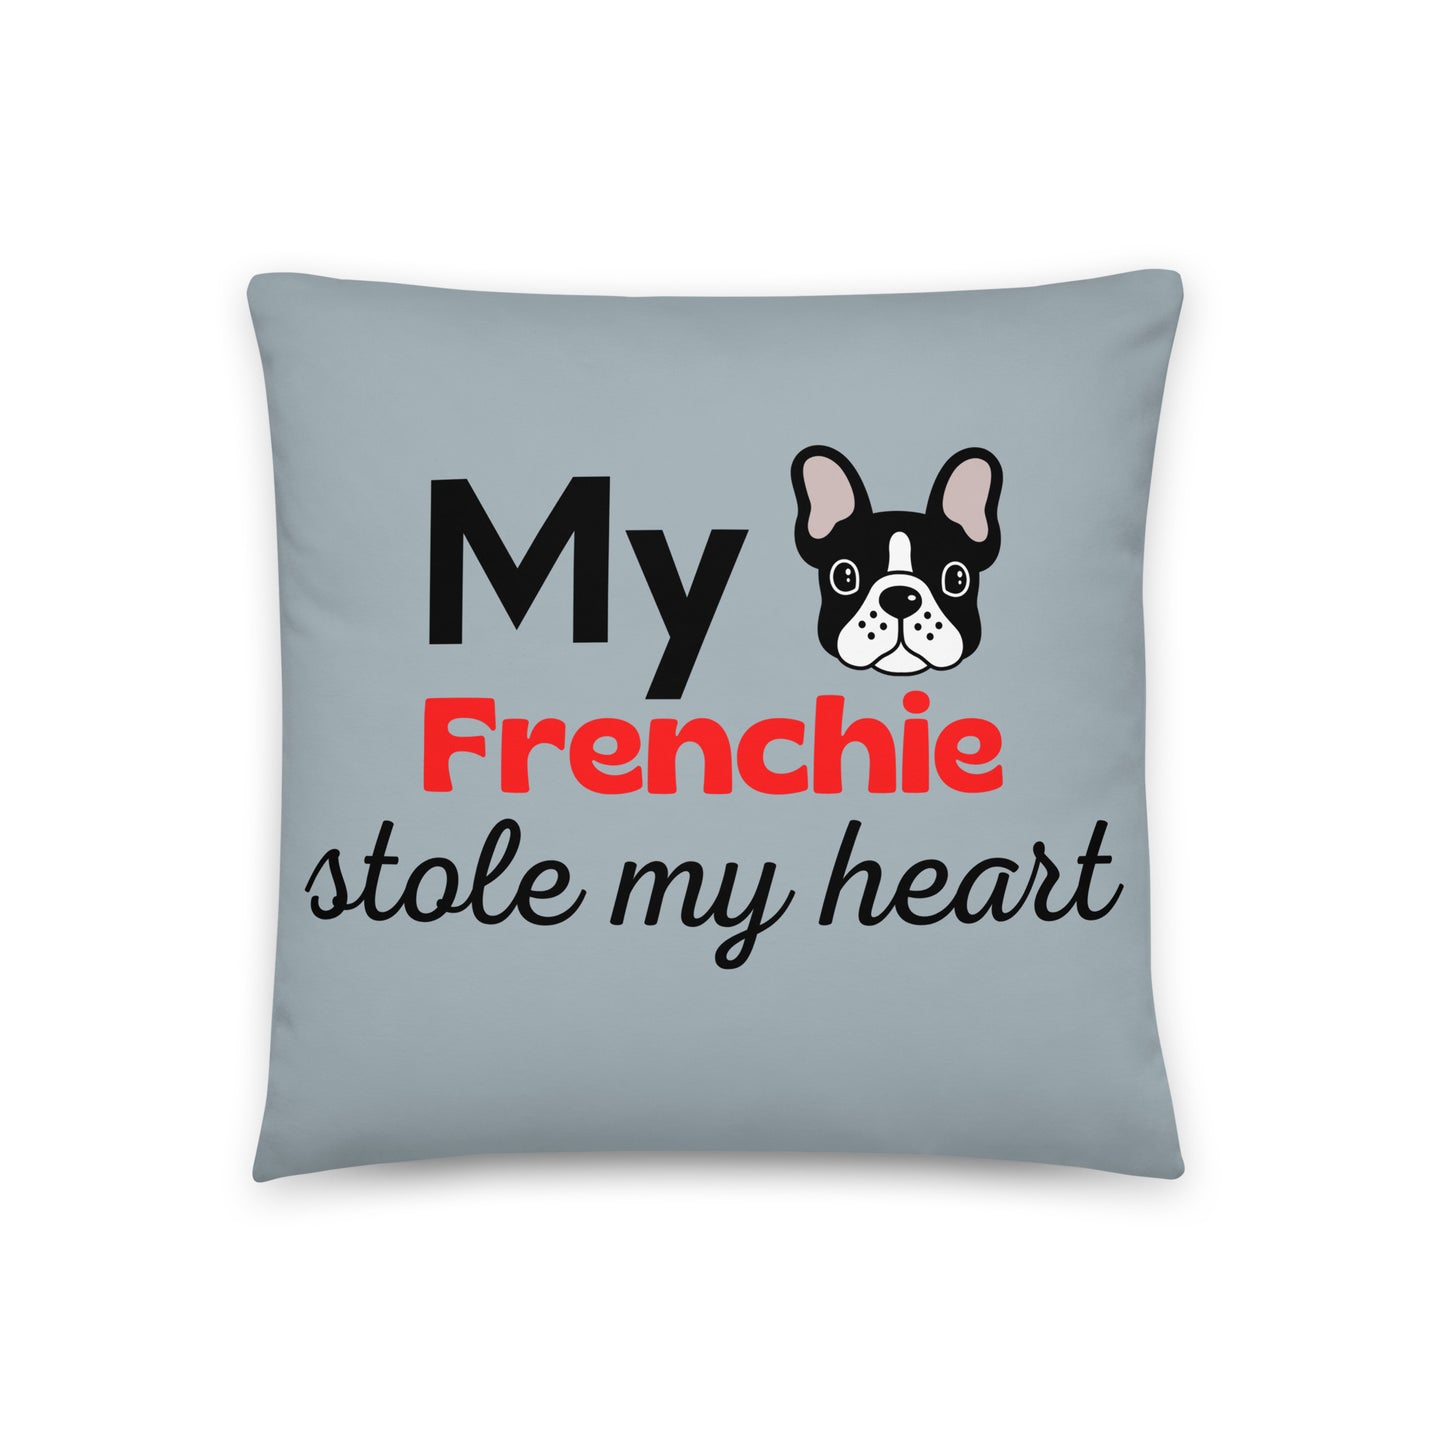 Grey Pillow 'My Frenchie stole my heart'